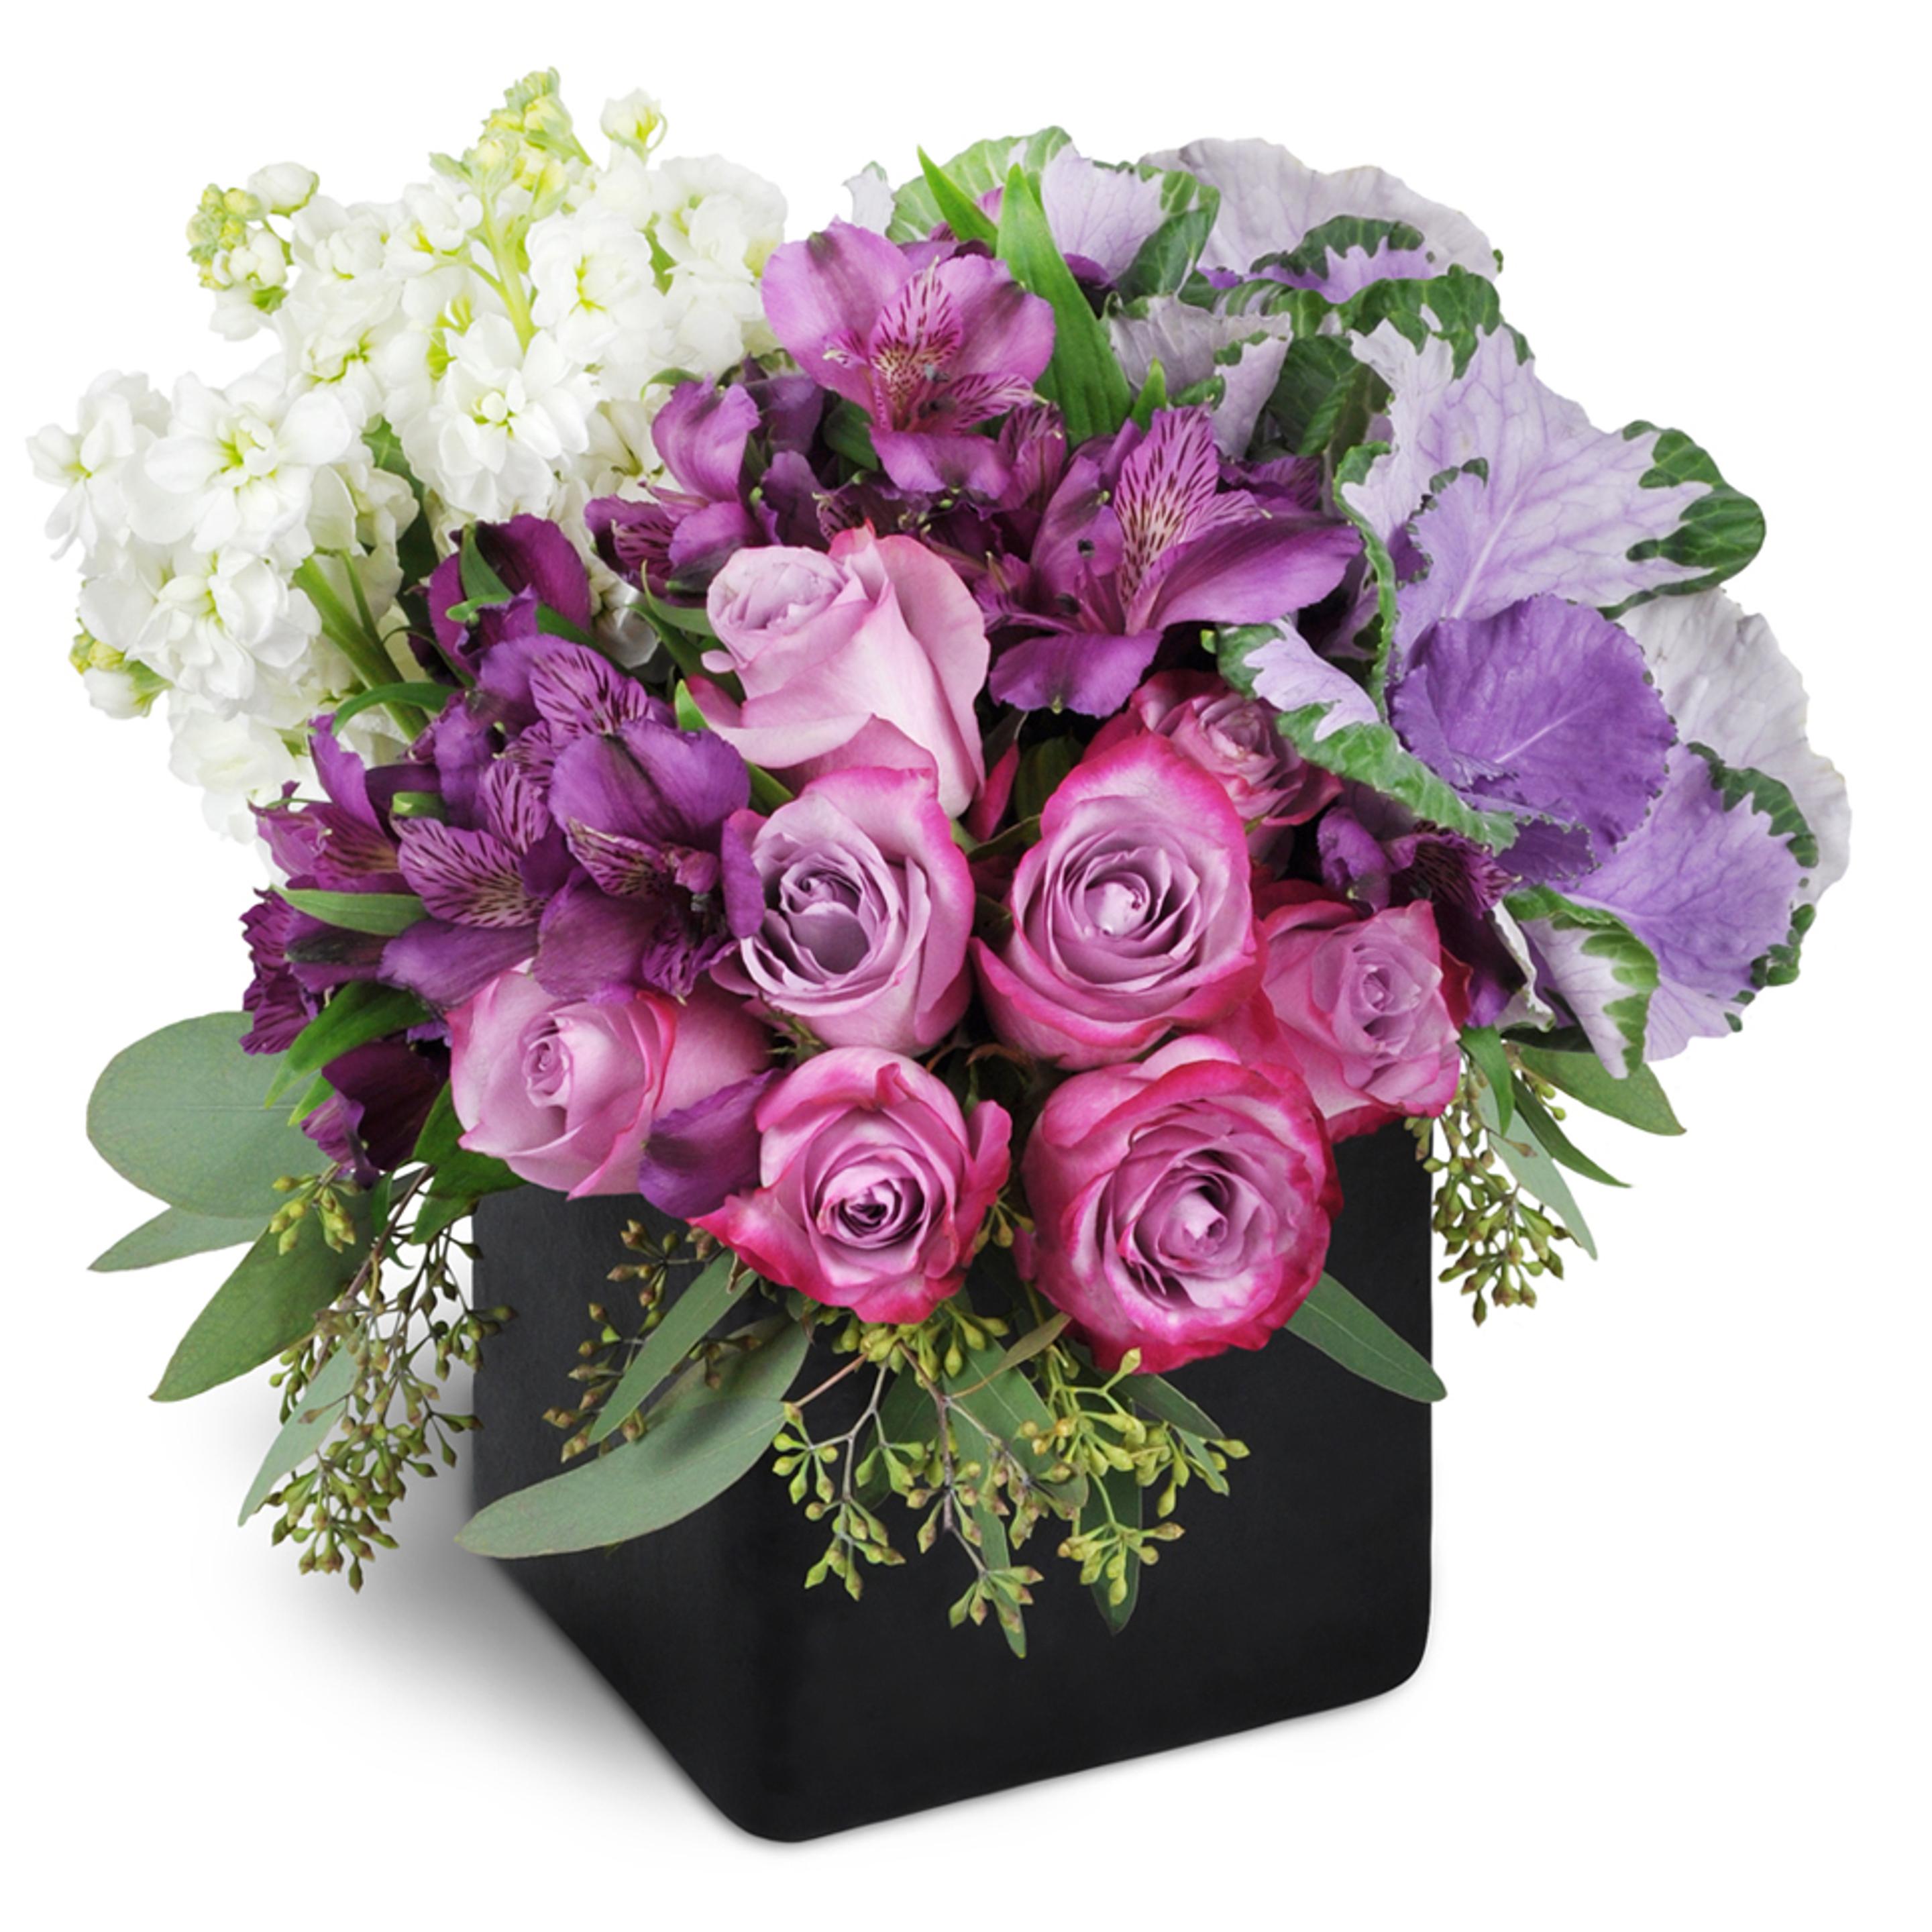 Purple flower arrangement with  lavender roses and purple Peruvian lilies.